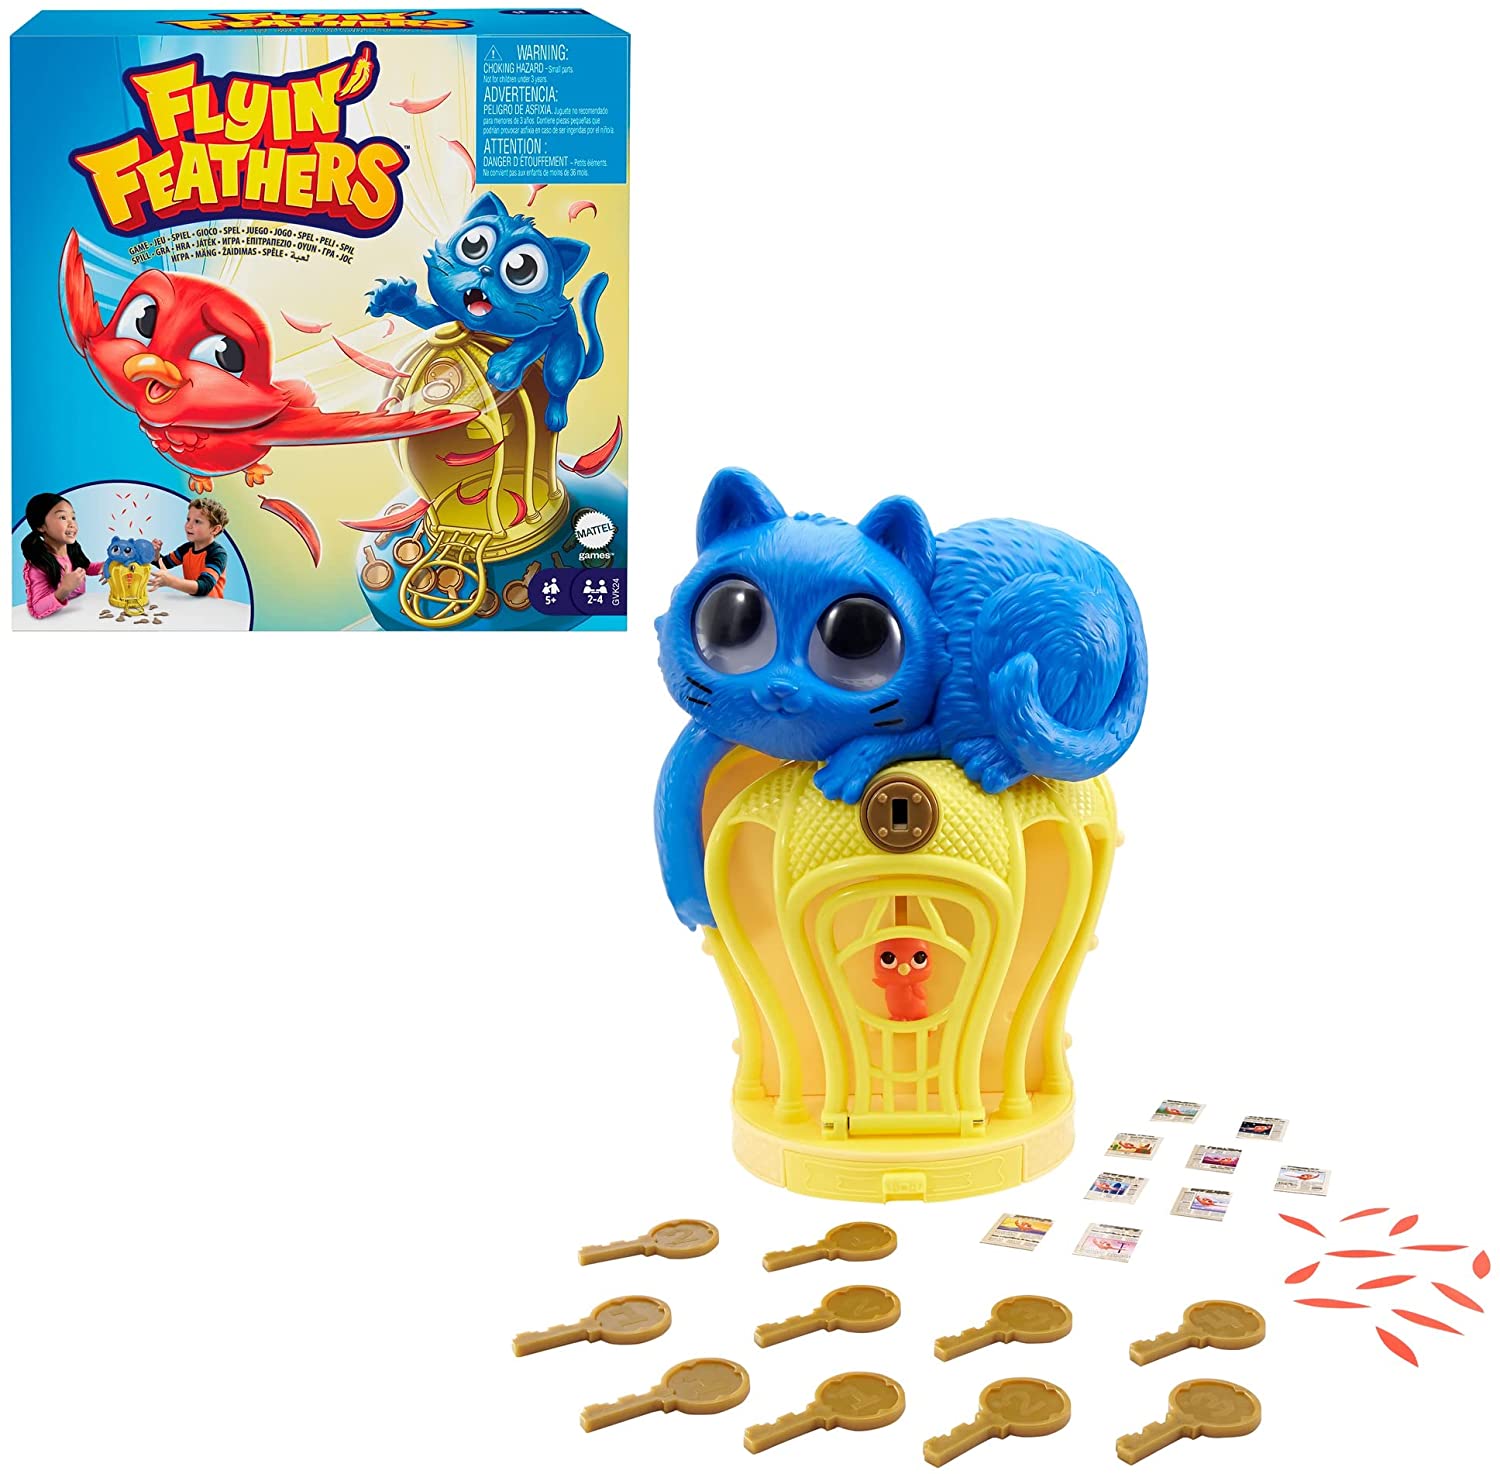 Flyin Feathers Kids' Game w/ Toy Cat & Bird in Birdcage $7 & More + FS w/ Amazon Prime or FS on $25+